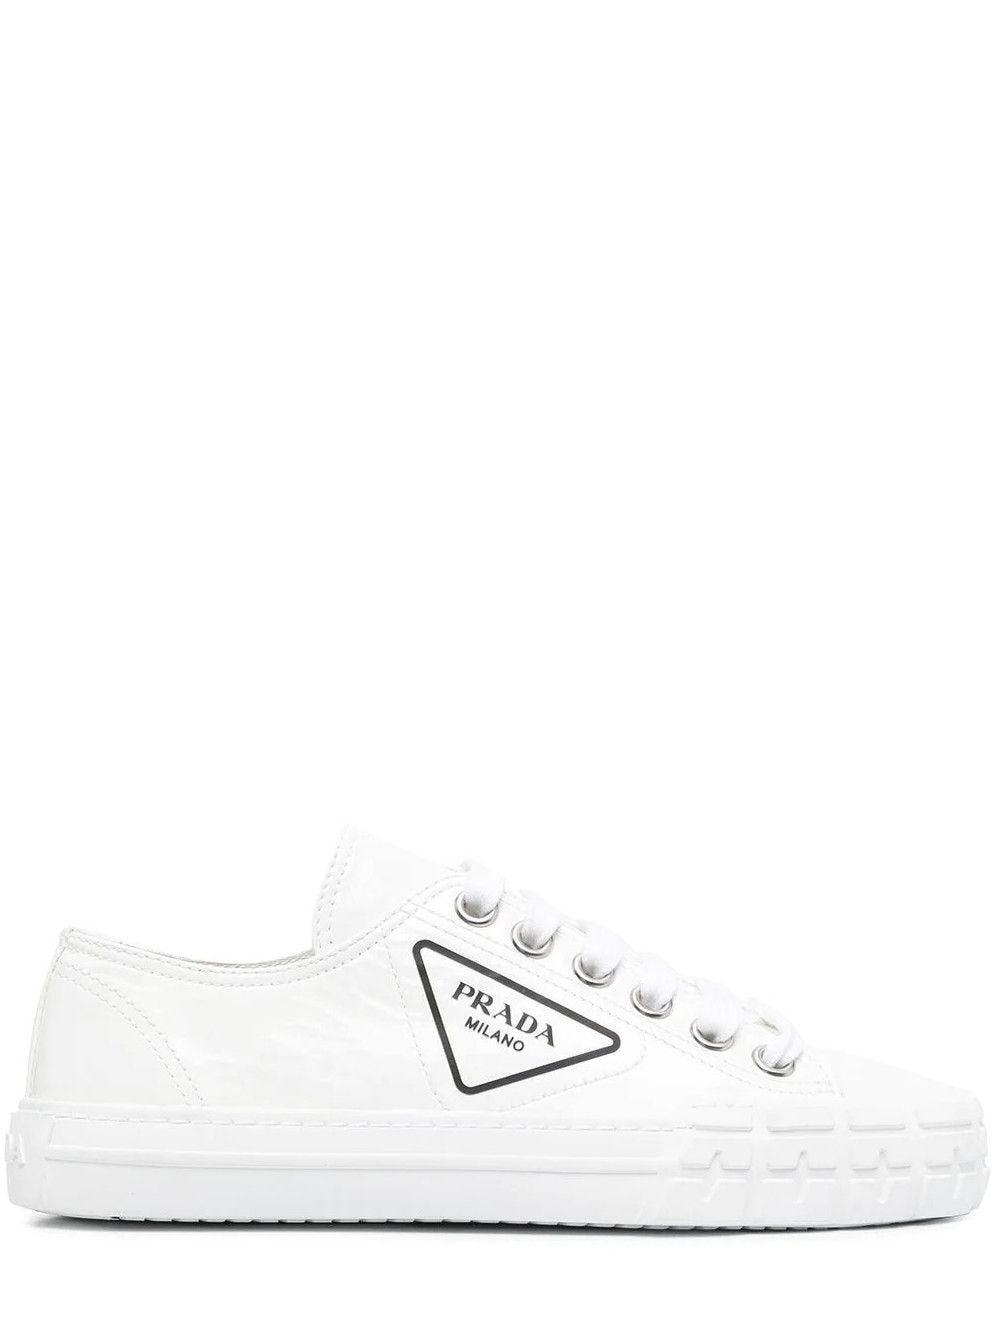 Prada White Wheel Patent Leather Sneakers With Vulcanized Rubber Sole | Lyst